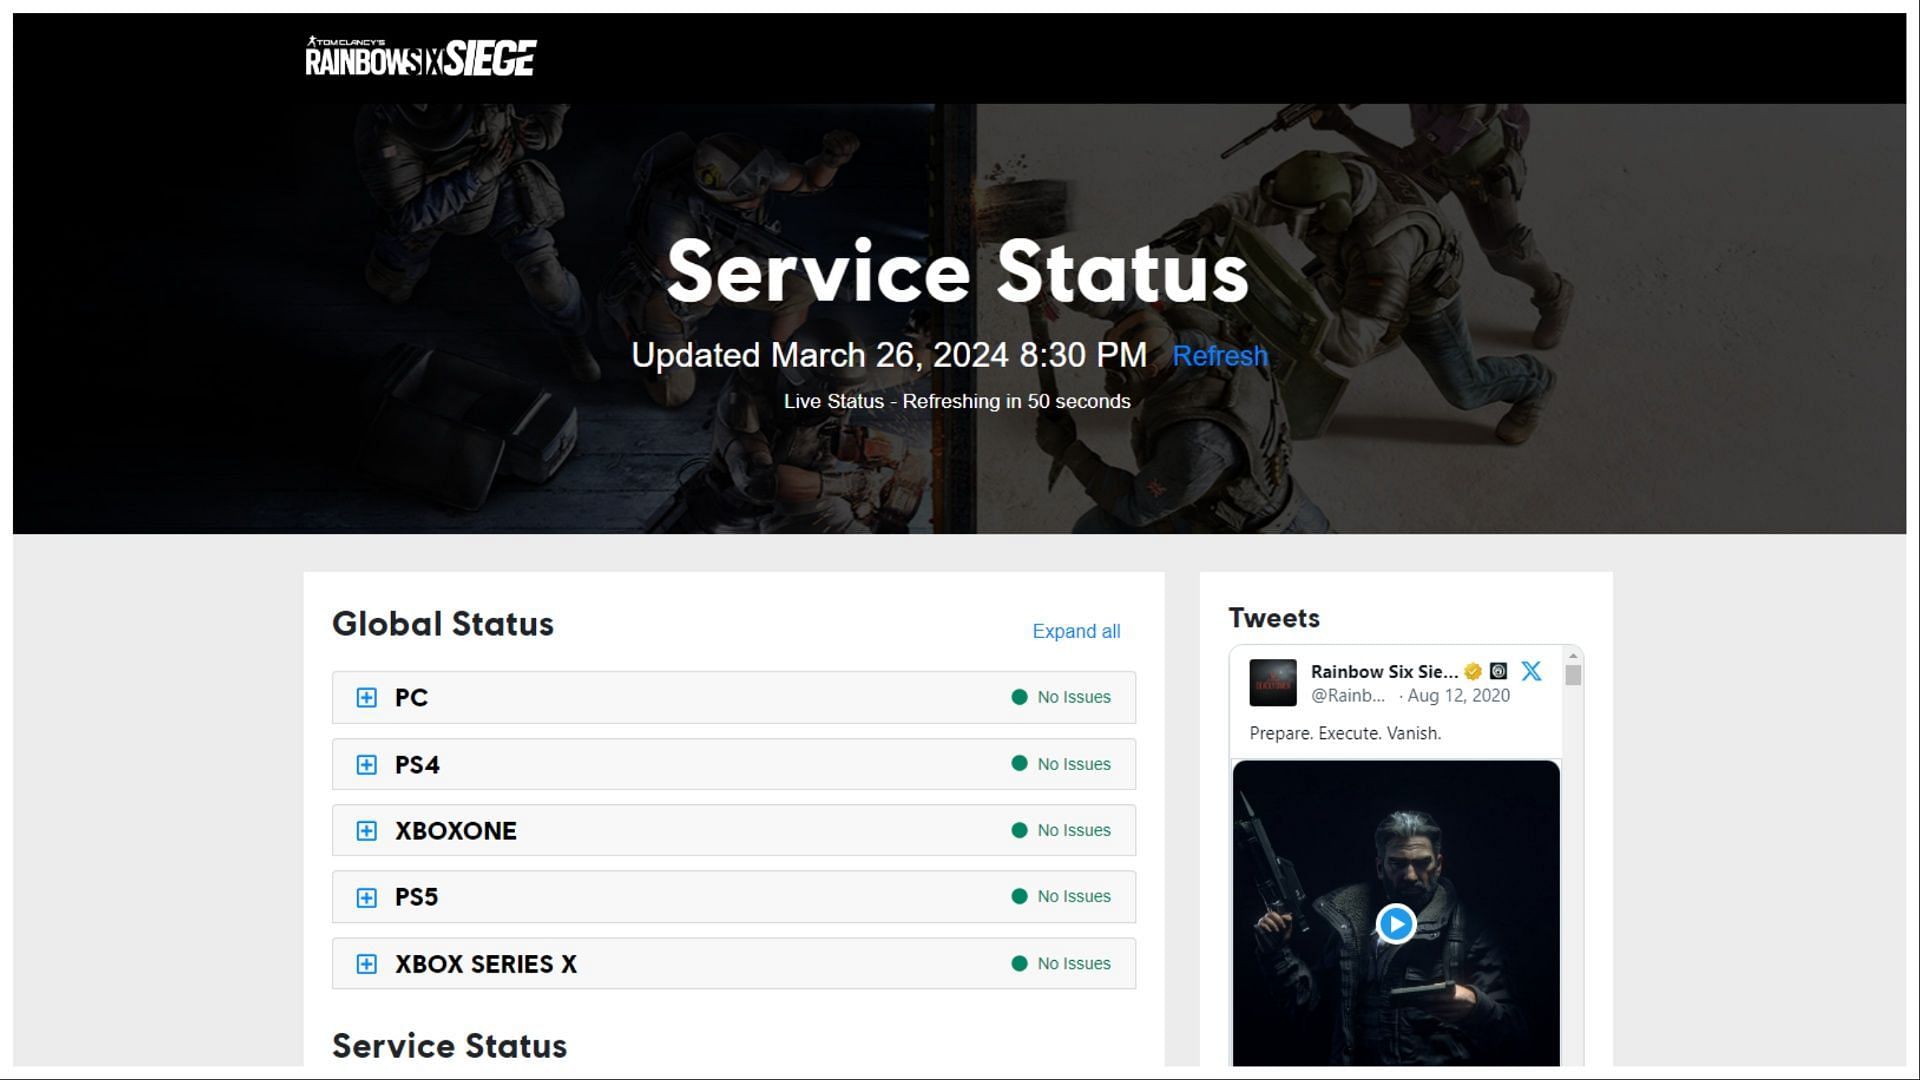 Servers are back up and running (Image via Ubisoft)